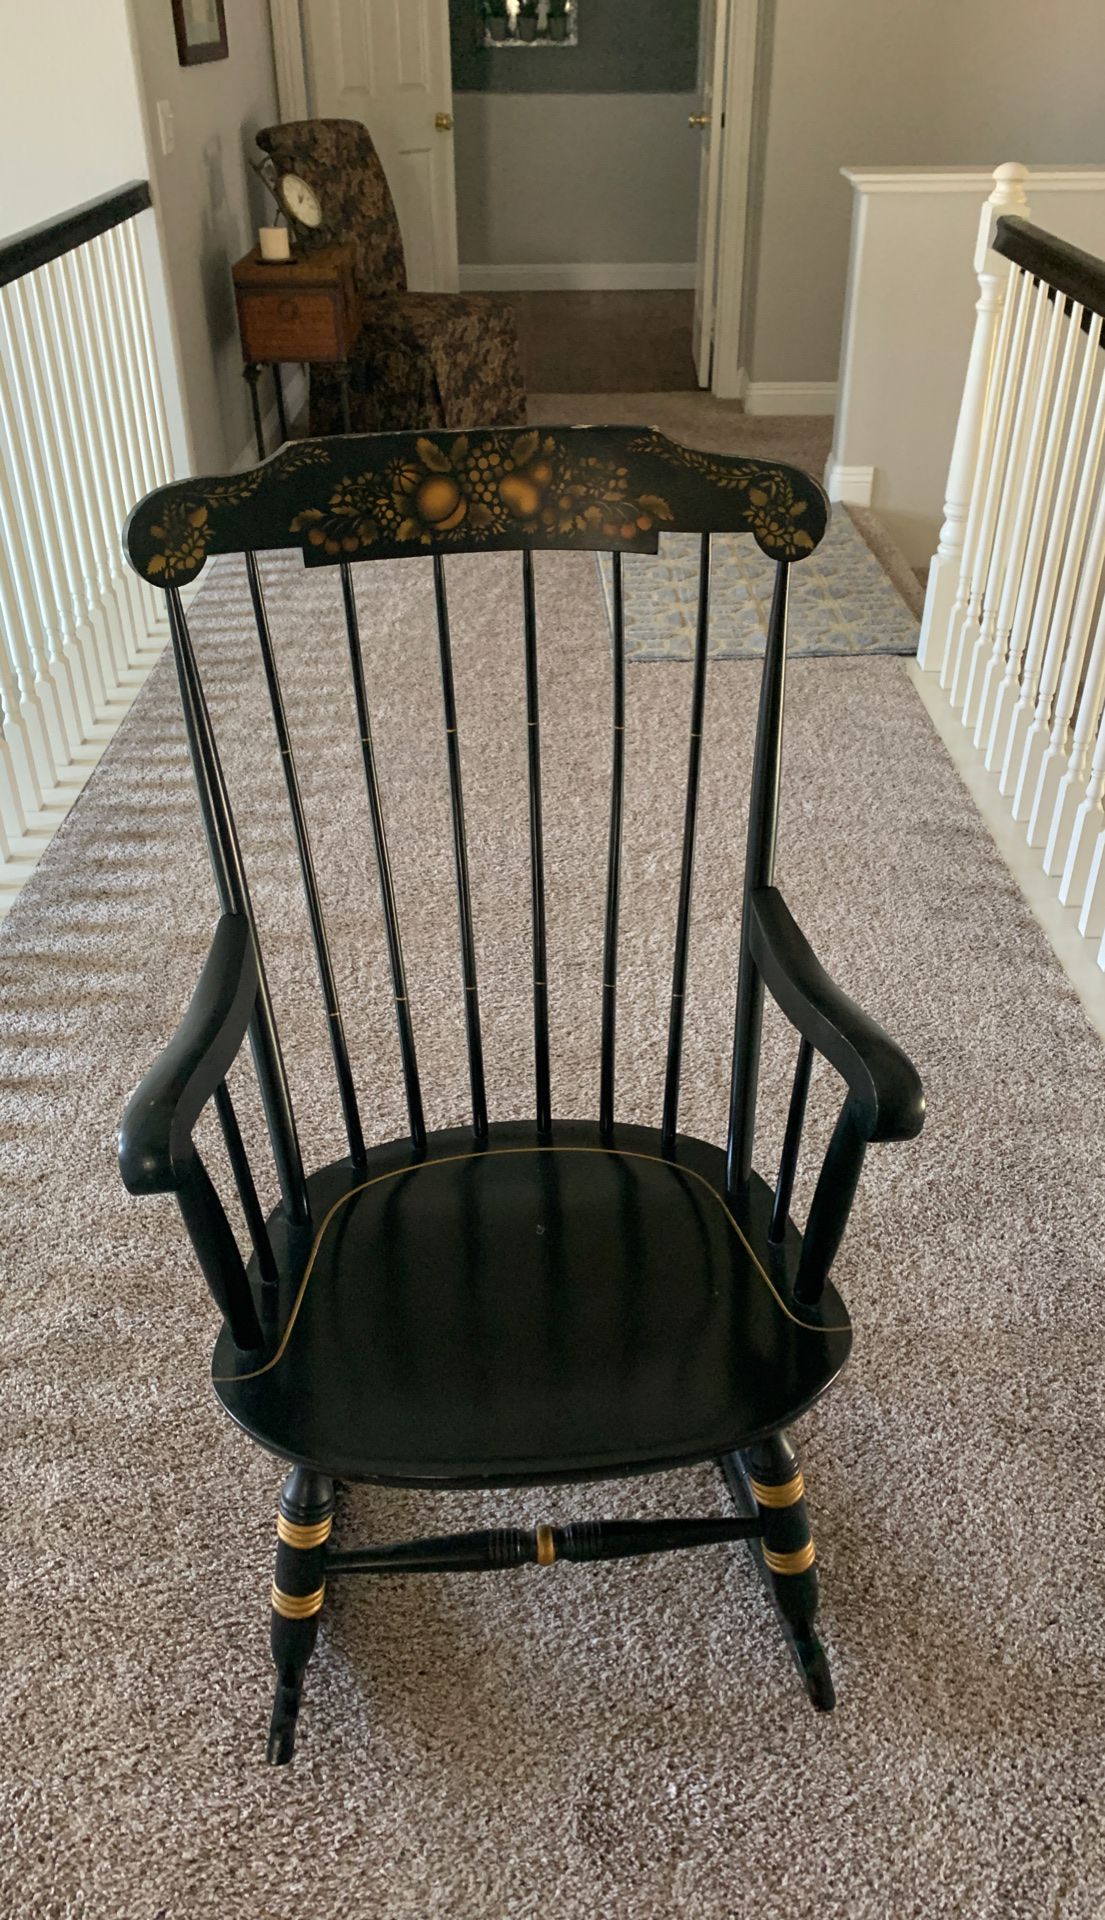 Antique all wood rocking chair